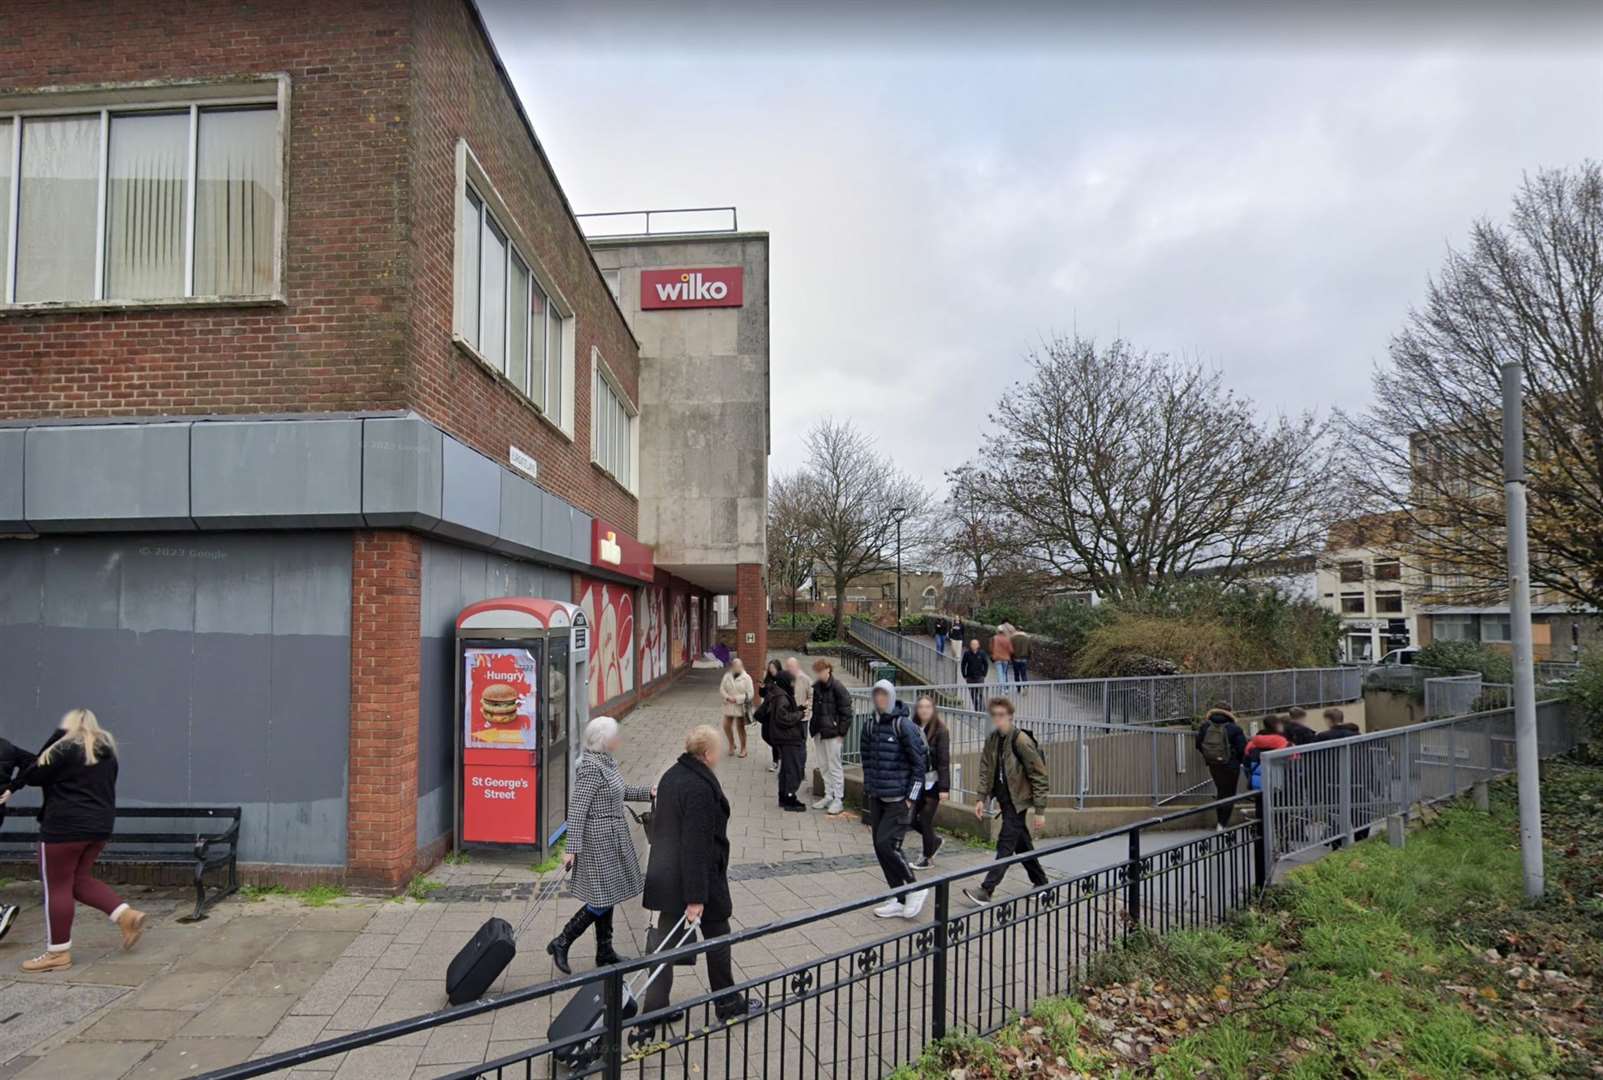 The Wilko building as it is currently. Picture: Google (63311253)